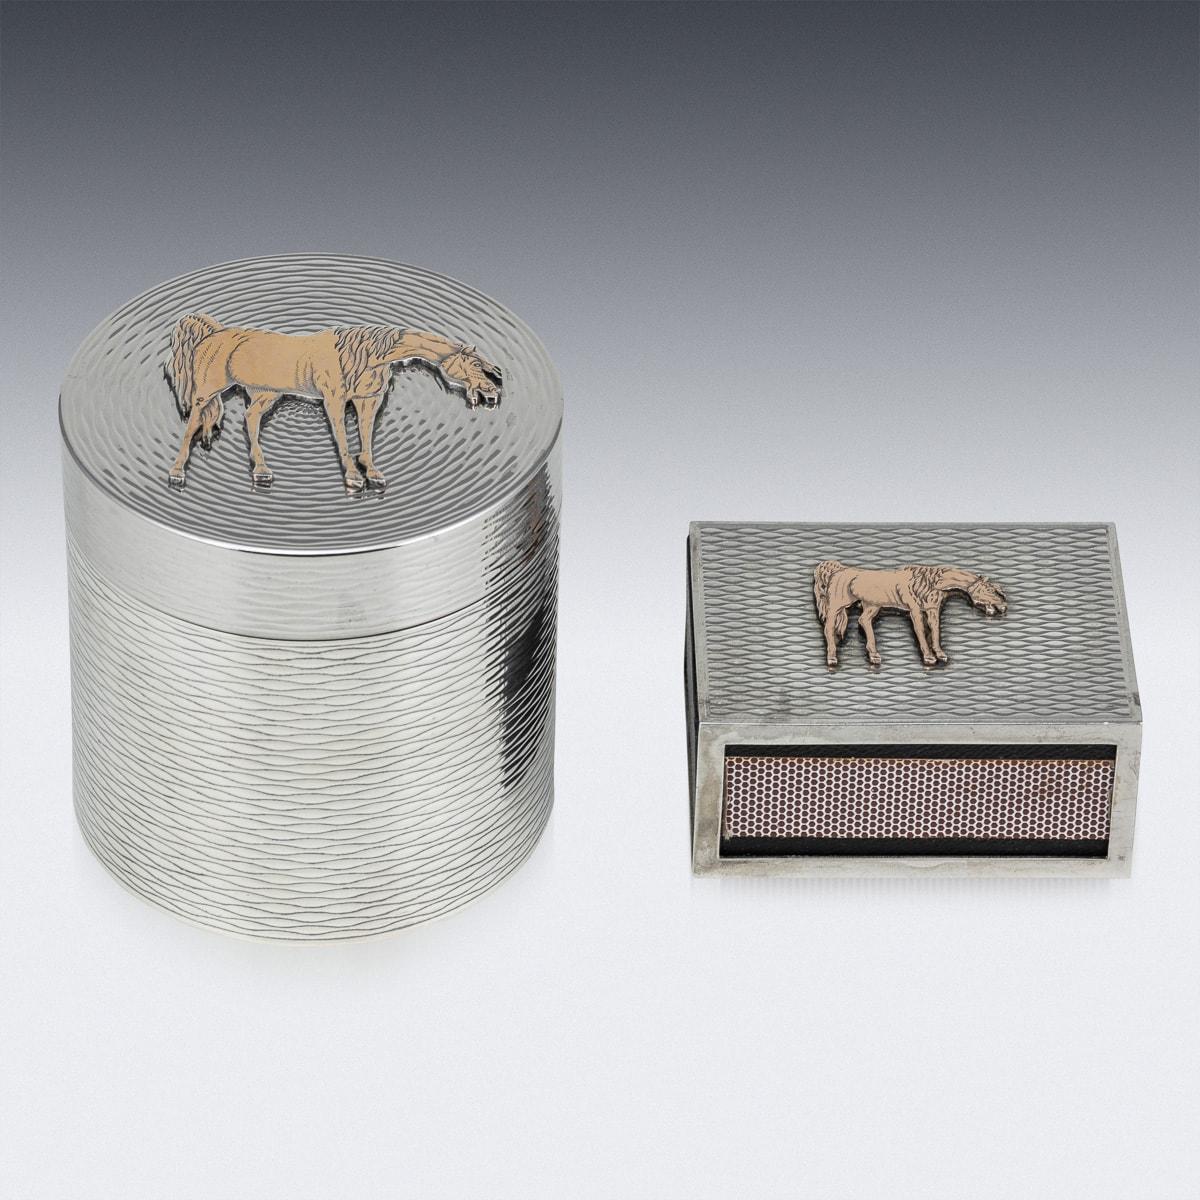 A Vintage mid-20th Century Hermes cigarette box and matchbox holder crafted from solid silver, adorned with exquisite gold horse detailing. This exceptional set, dating back to 1960, epitomises luxury in smoking accessories. Consisting of a circular